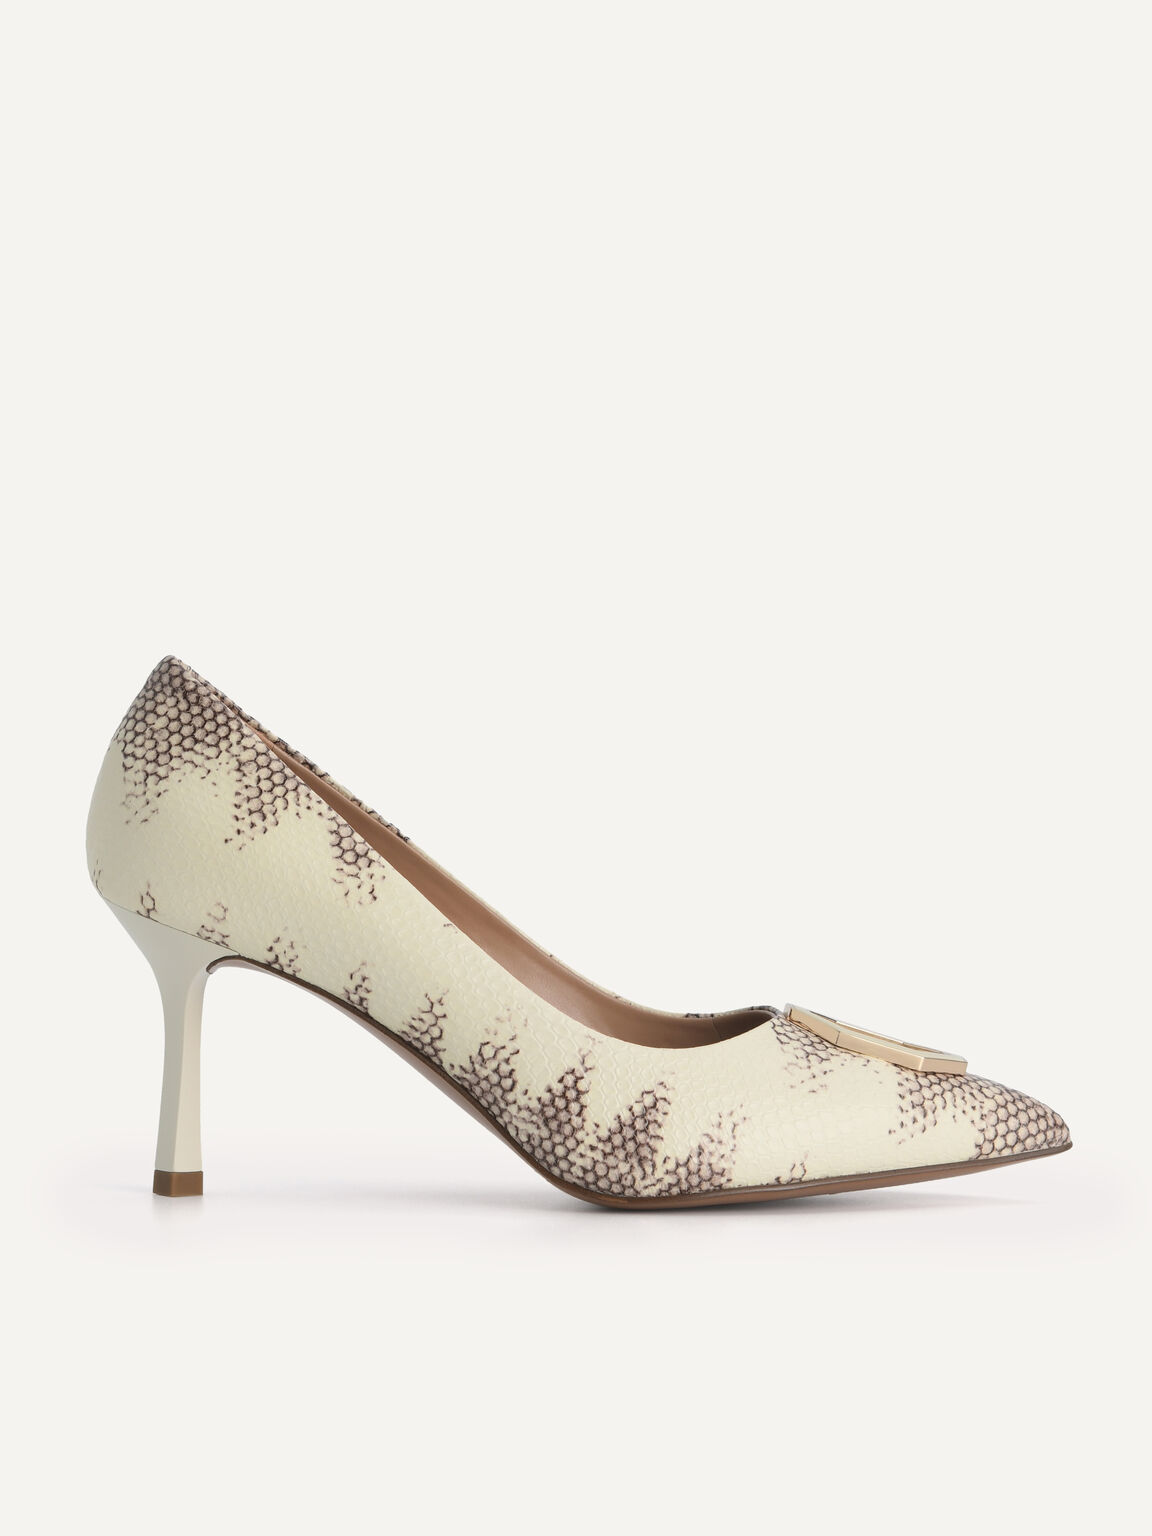 Printed Leather Pointed Toe Pumps, Multi